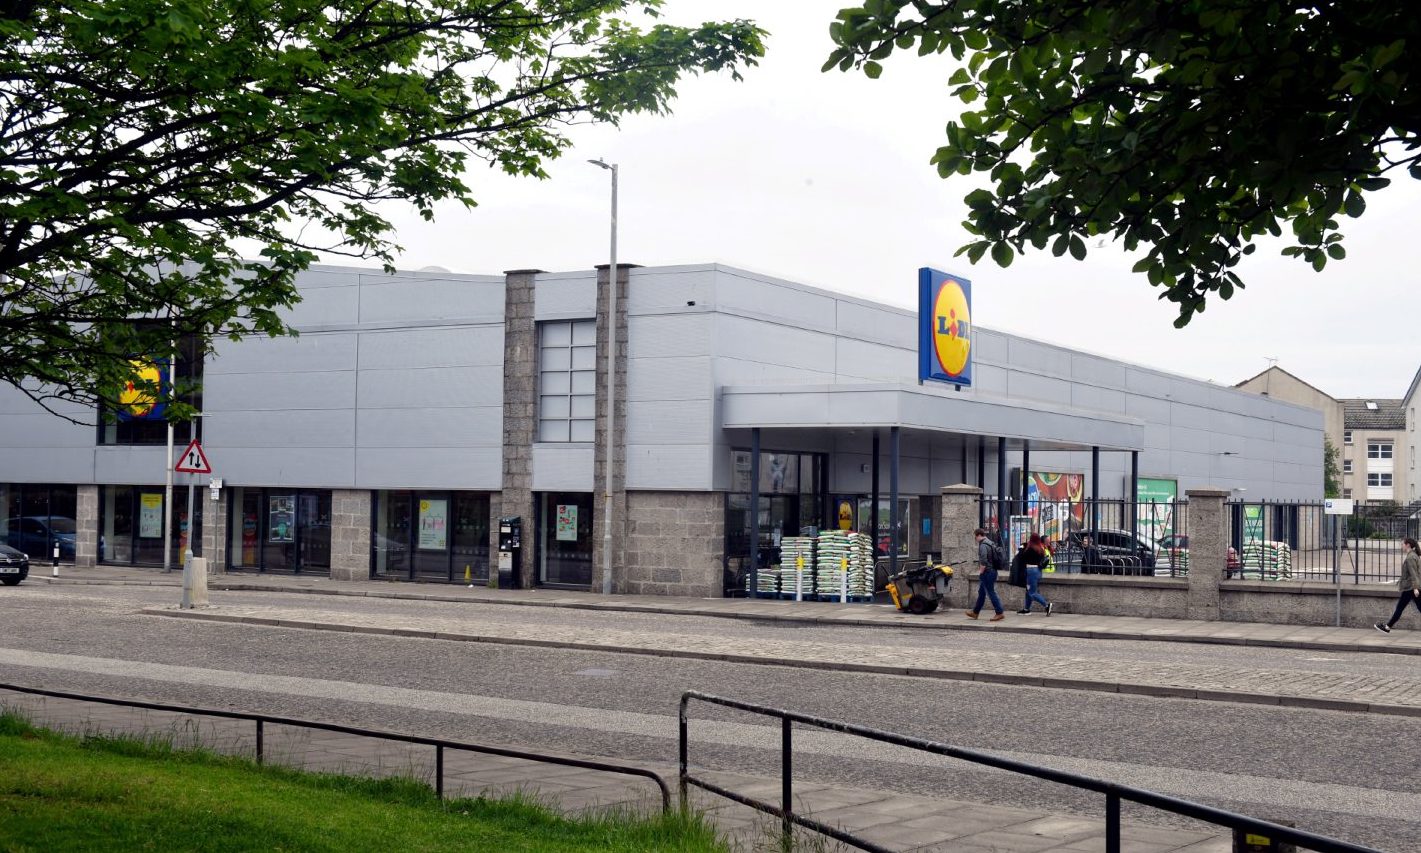 Proposals have been lodged to open a Screwfix counter in an unused part of the Lidl store on Hutcheon Street